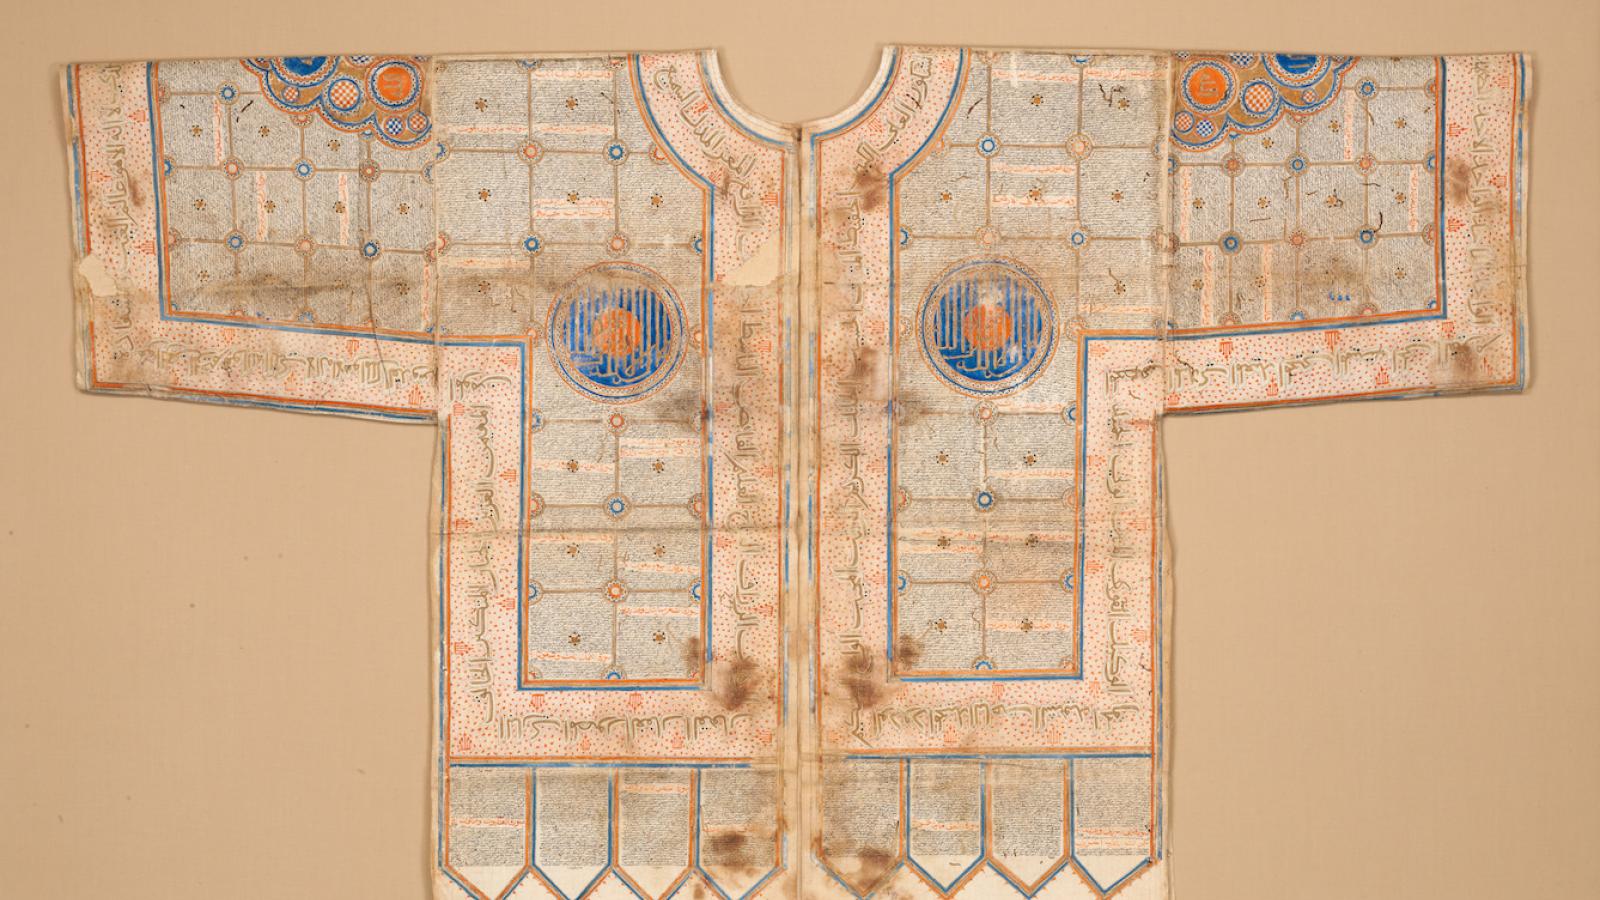 Talismanic shirt from 15th century North India to protect the wearer against plague